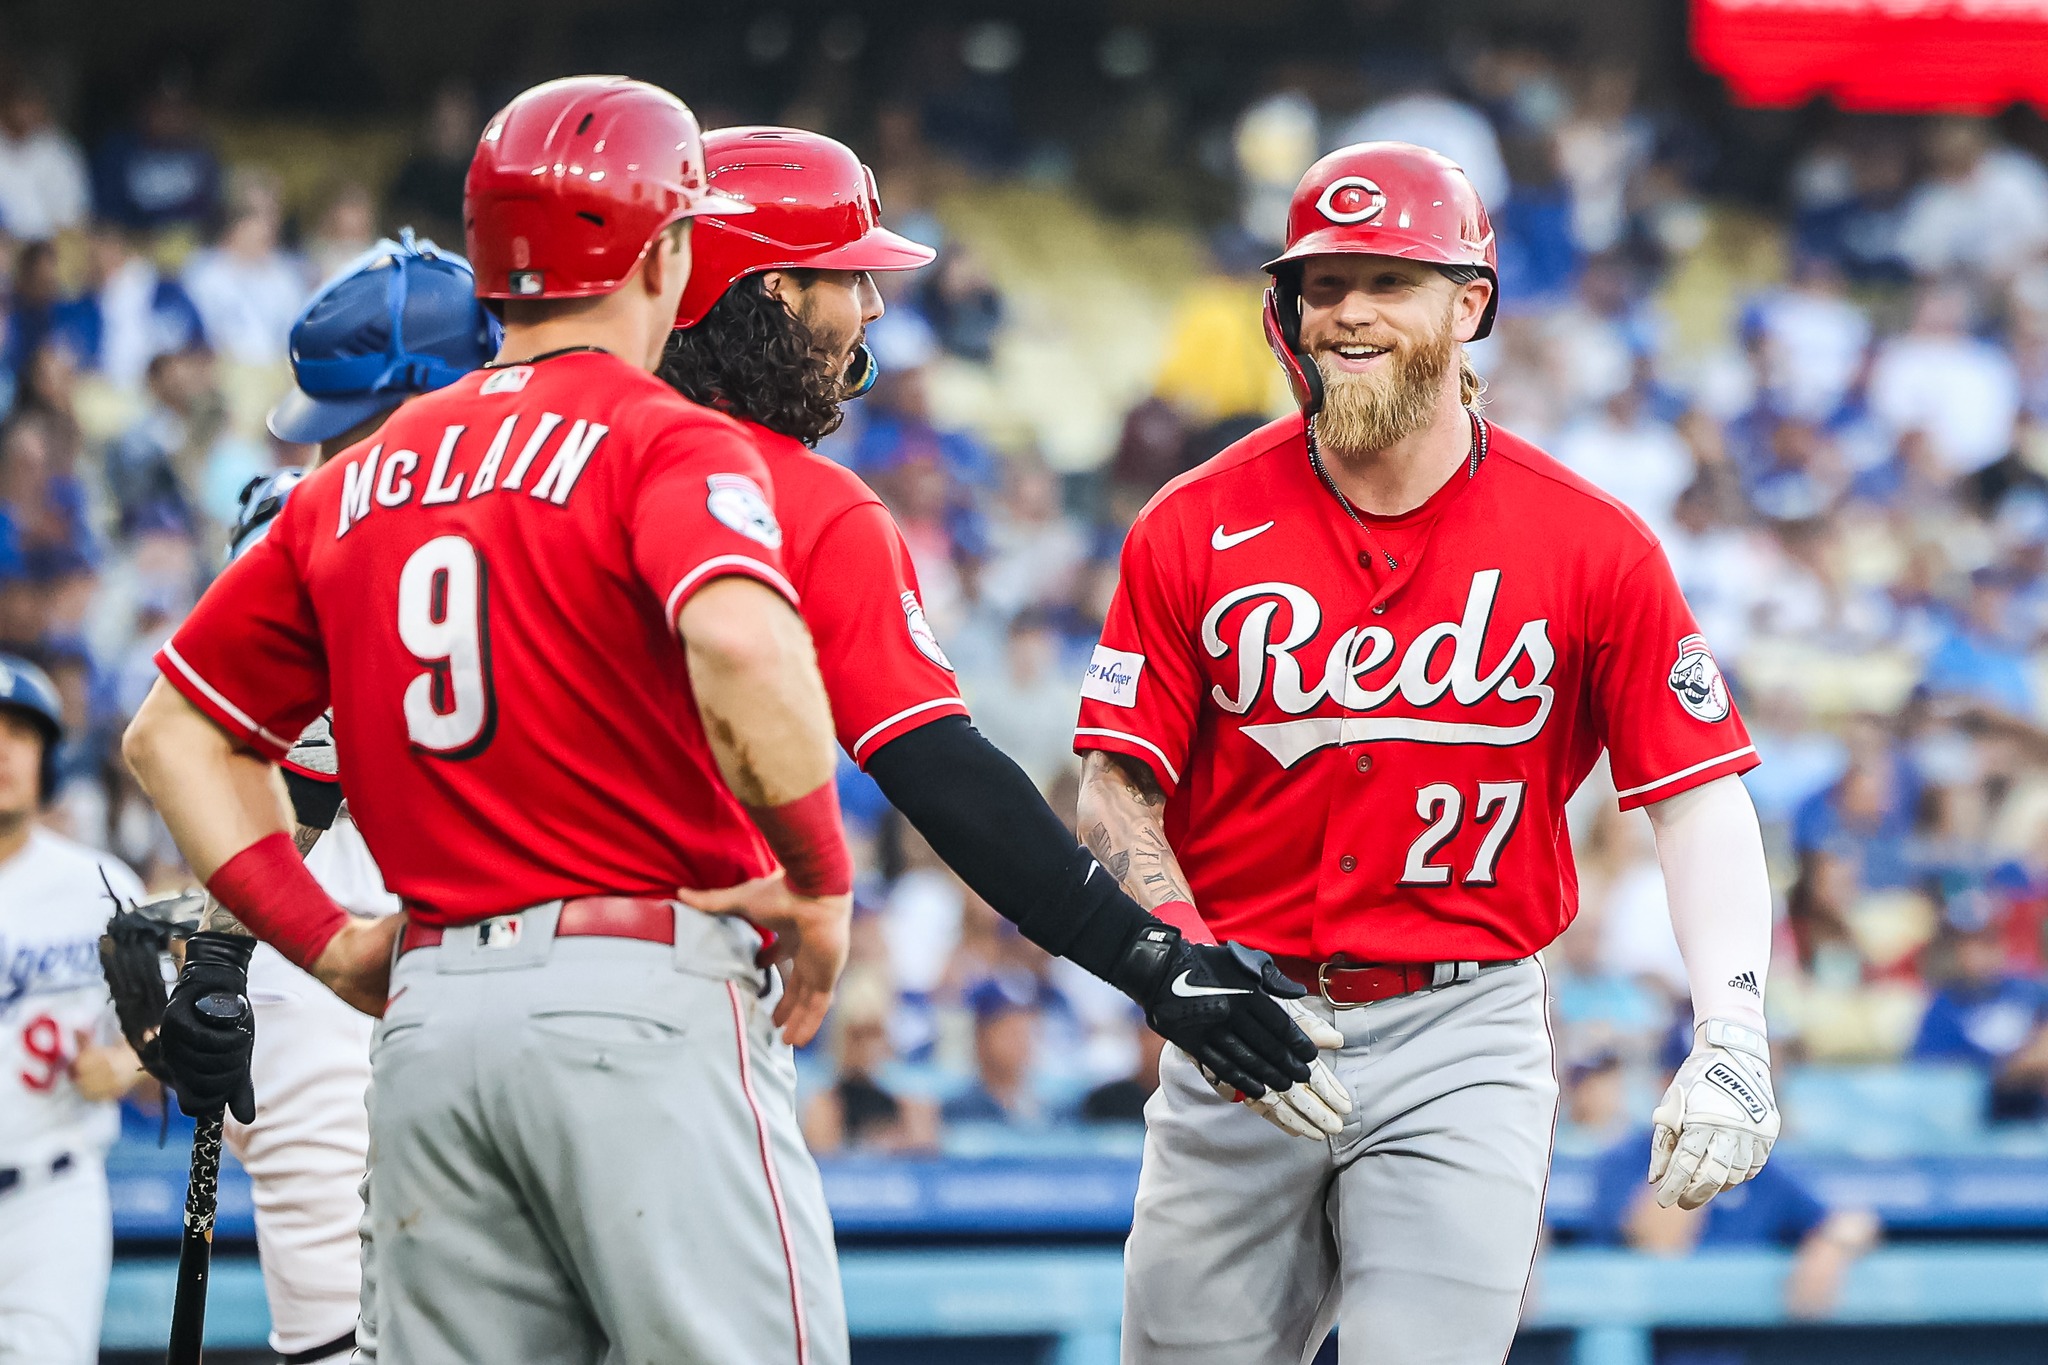 Reds manager Bell agrees to 2-year extension